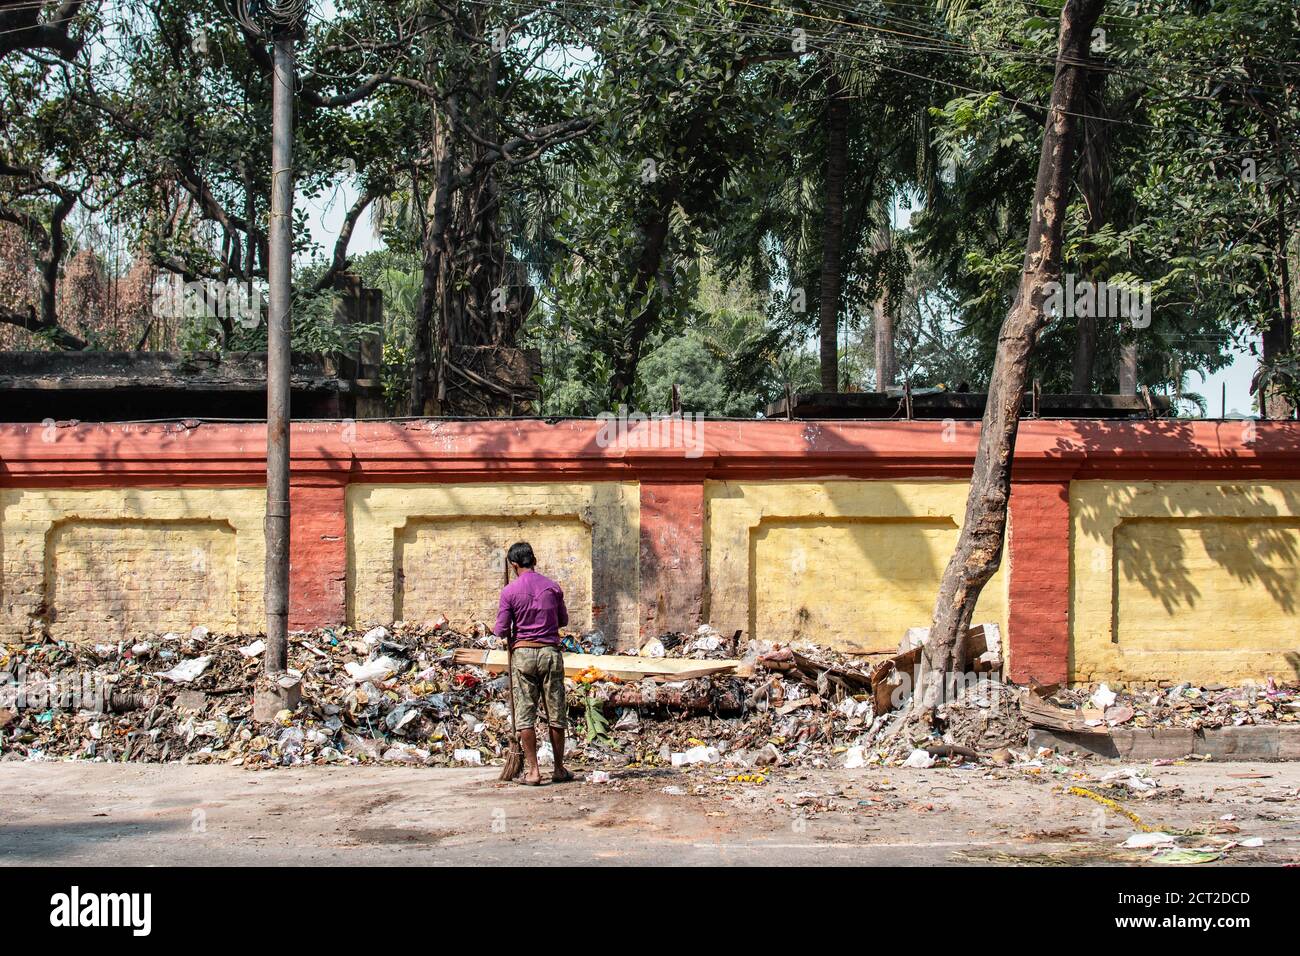 Kolkata, India - February 1, 2020: An unidentified man in purple shirt stands by himself with a broom infront of a big pile of plastic landfill waste Stock Photo